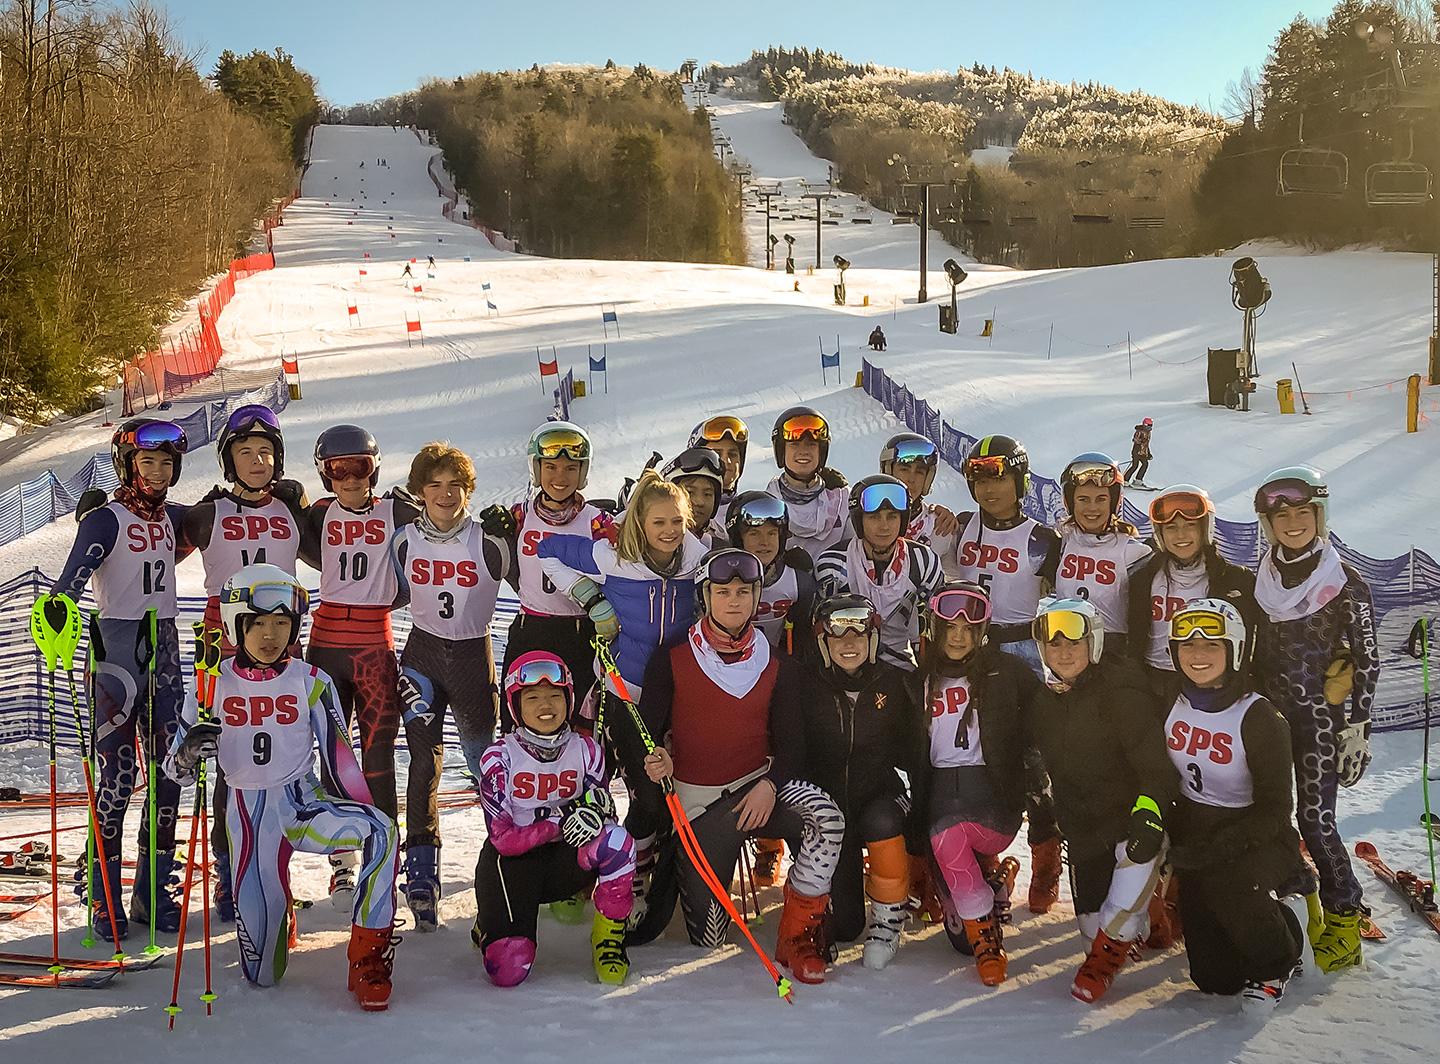 Alpine Ski group at end of race